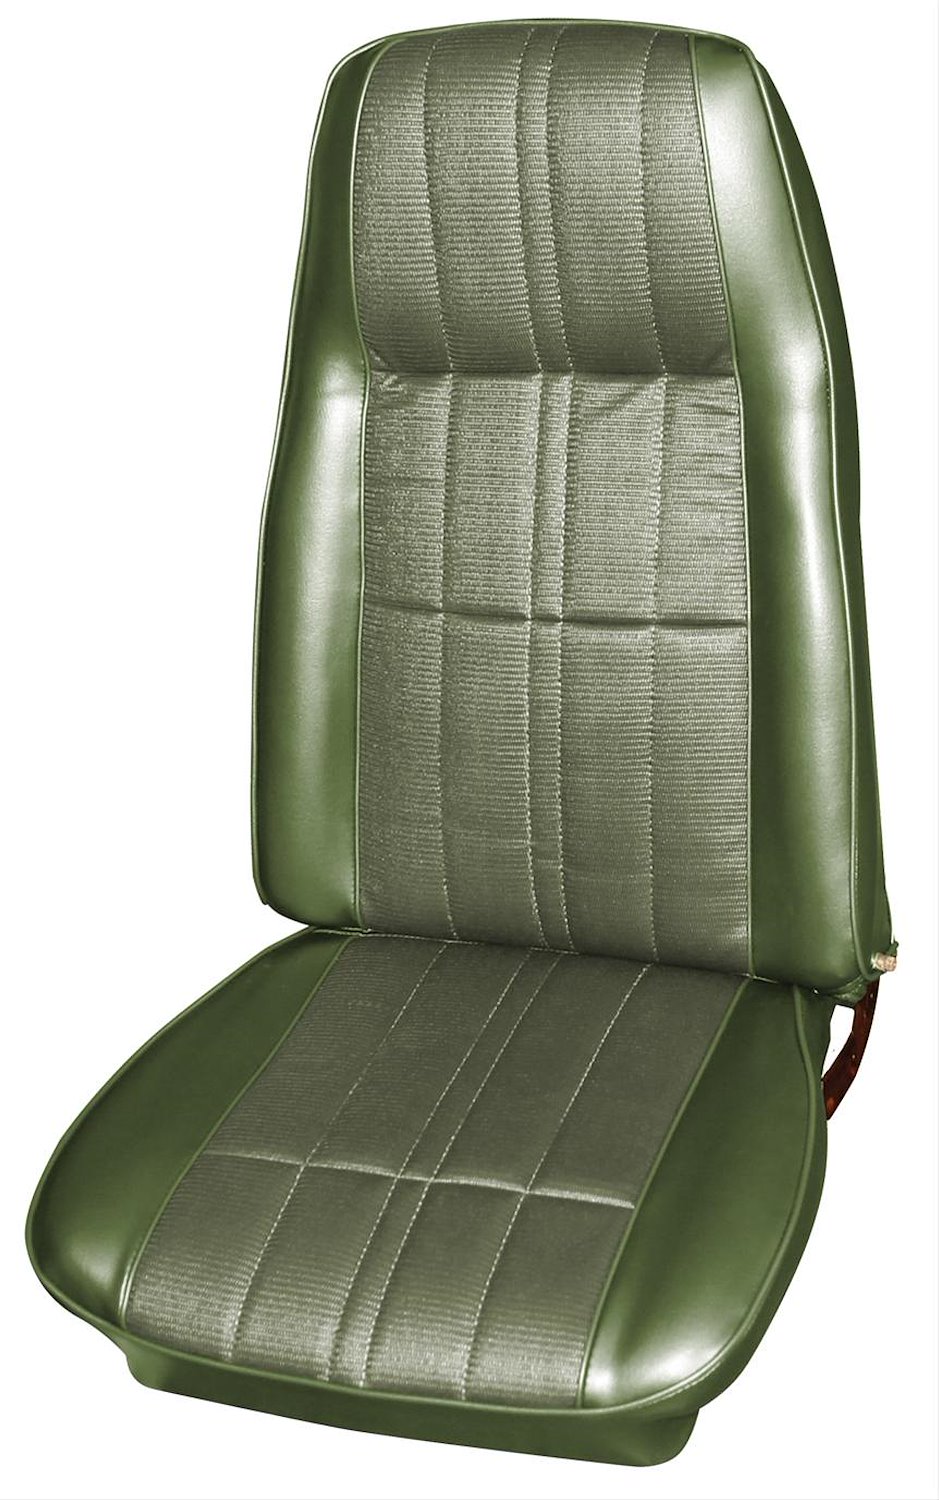 1971-1973 Ford Mustang Coupe Deluxe and Grande Interior Front Bucket and Rear Bench Seat Upholstery Set